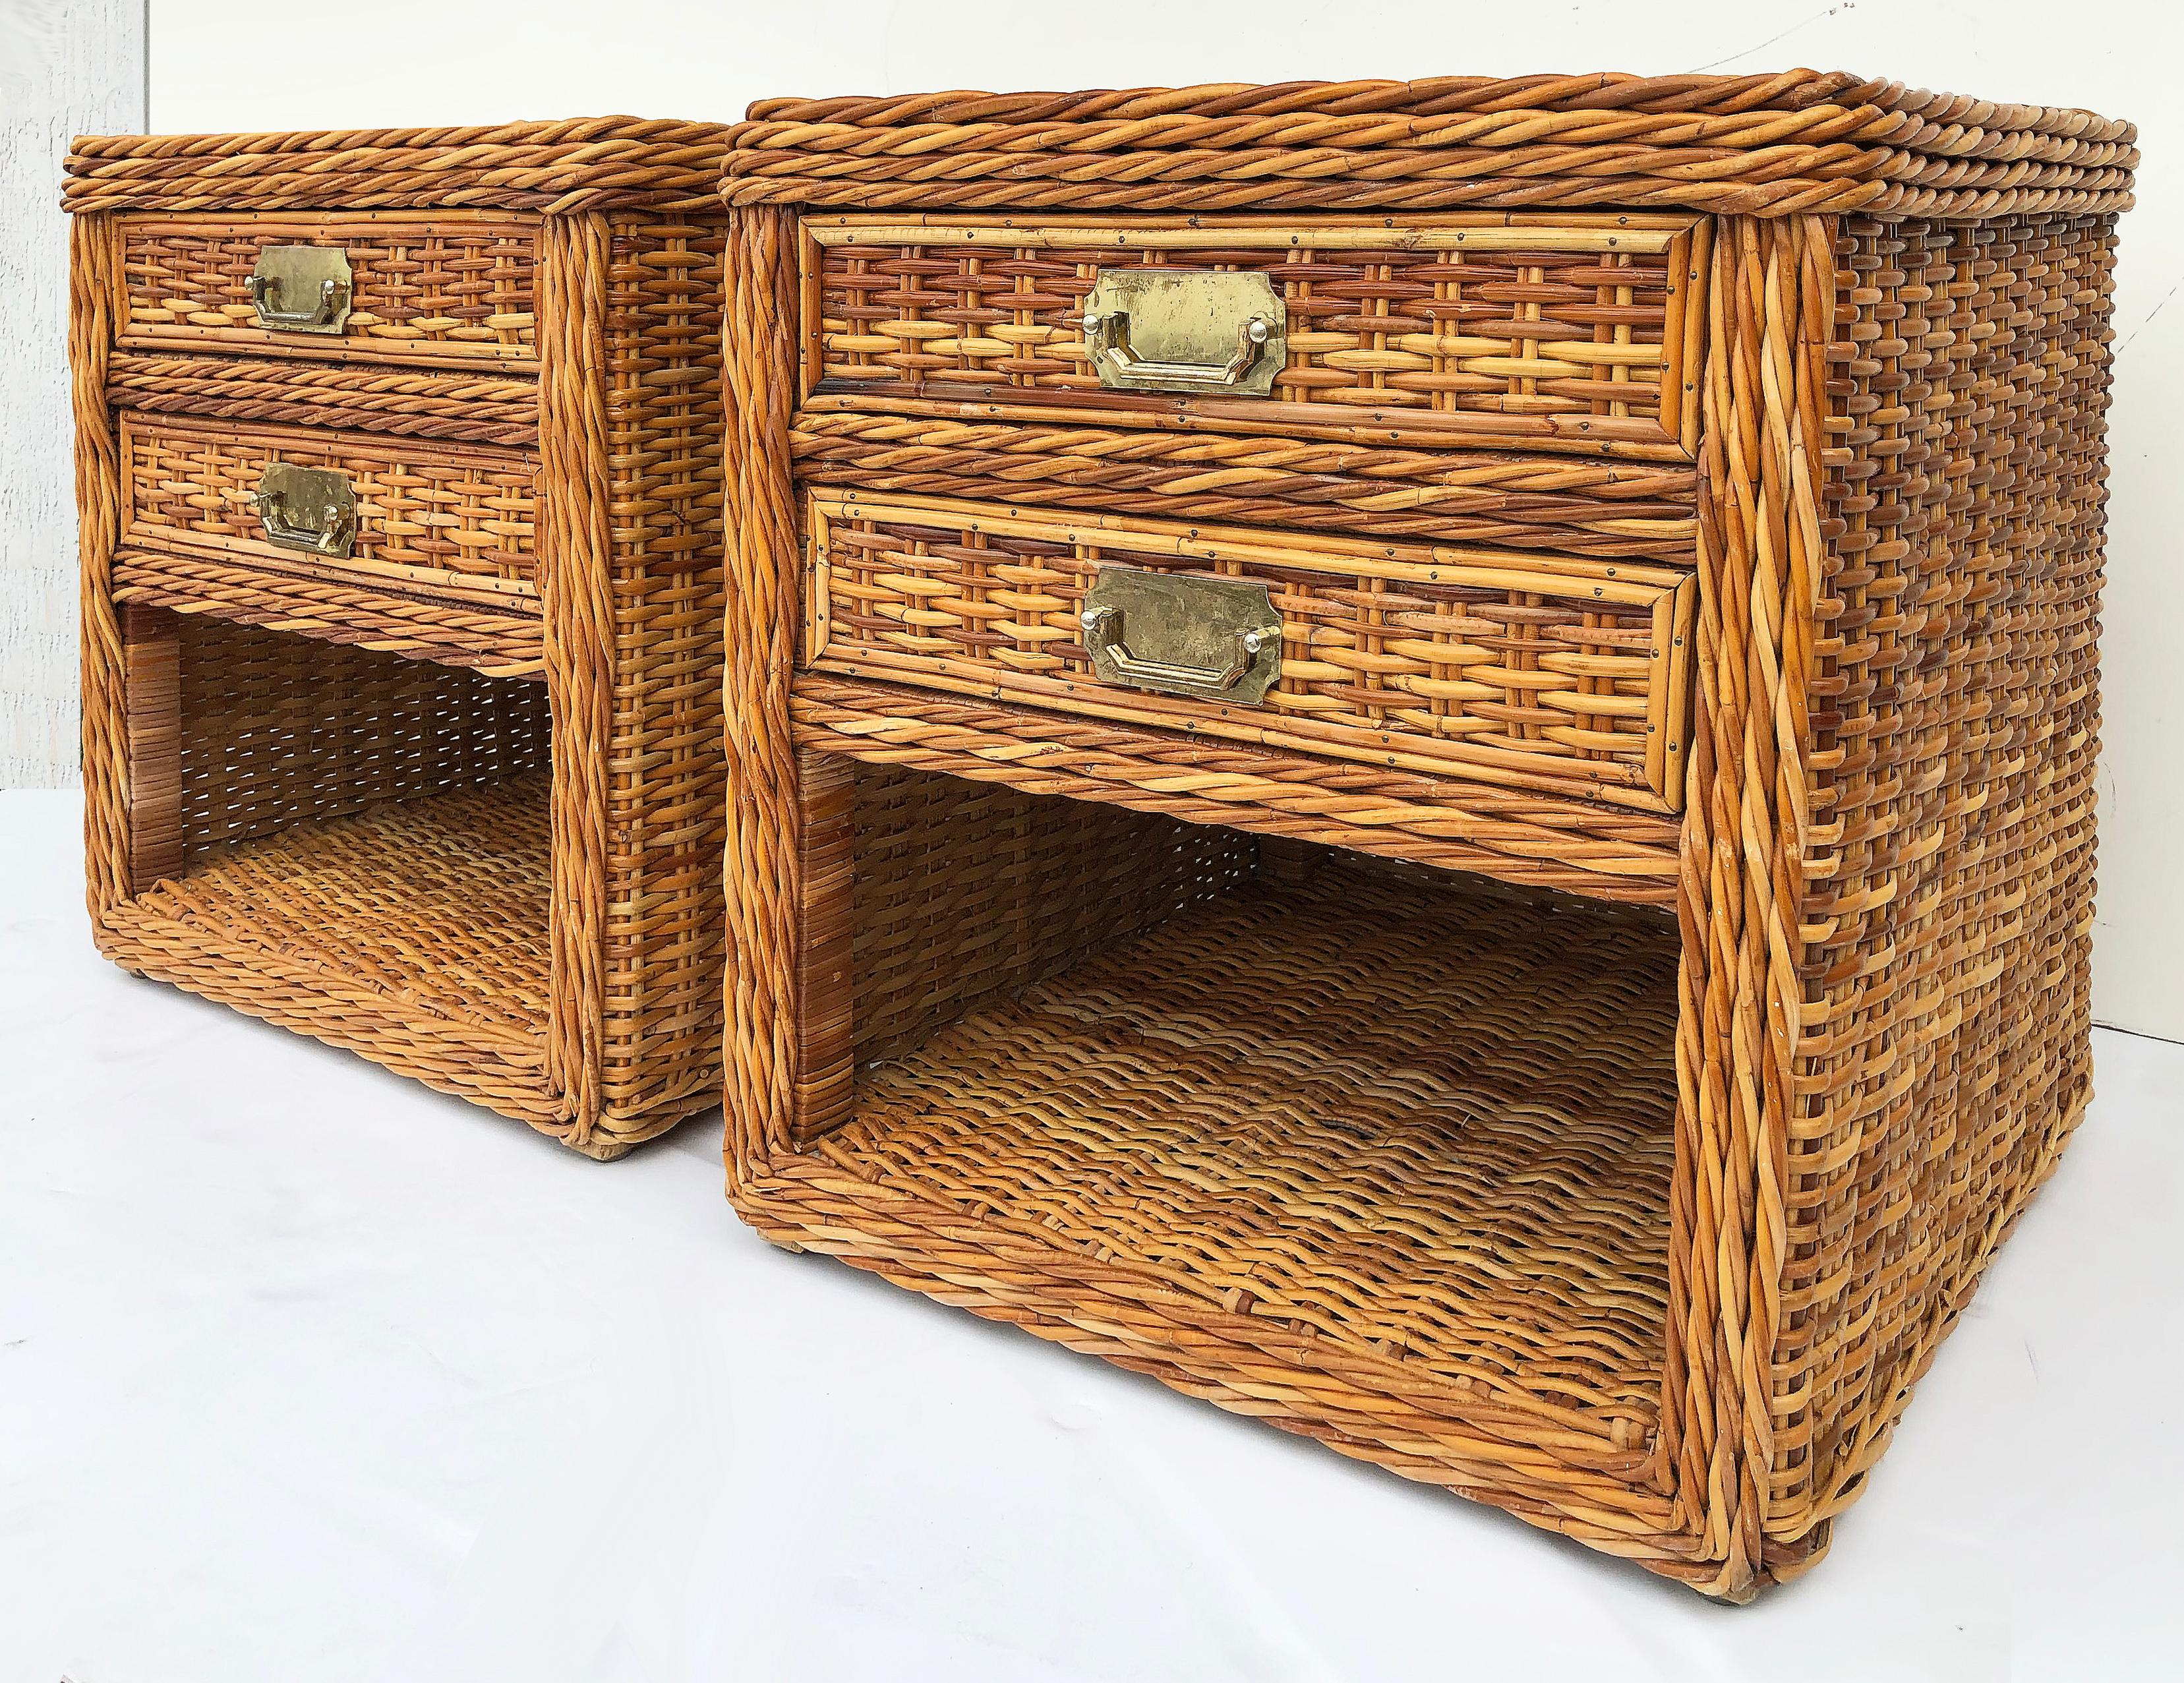 Vintage Bielecky Brothers woven rattan night stands, pair

Offered is a pair of Coastal style woven rattan night stands with brass handles. Each piece has two drawers above with open storage below. The nightstands are from the Bielecky Brothers of